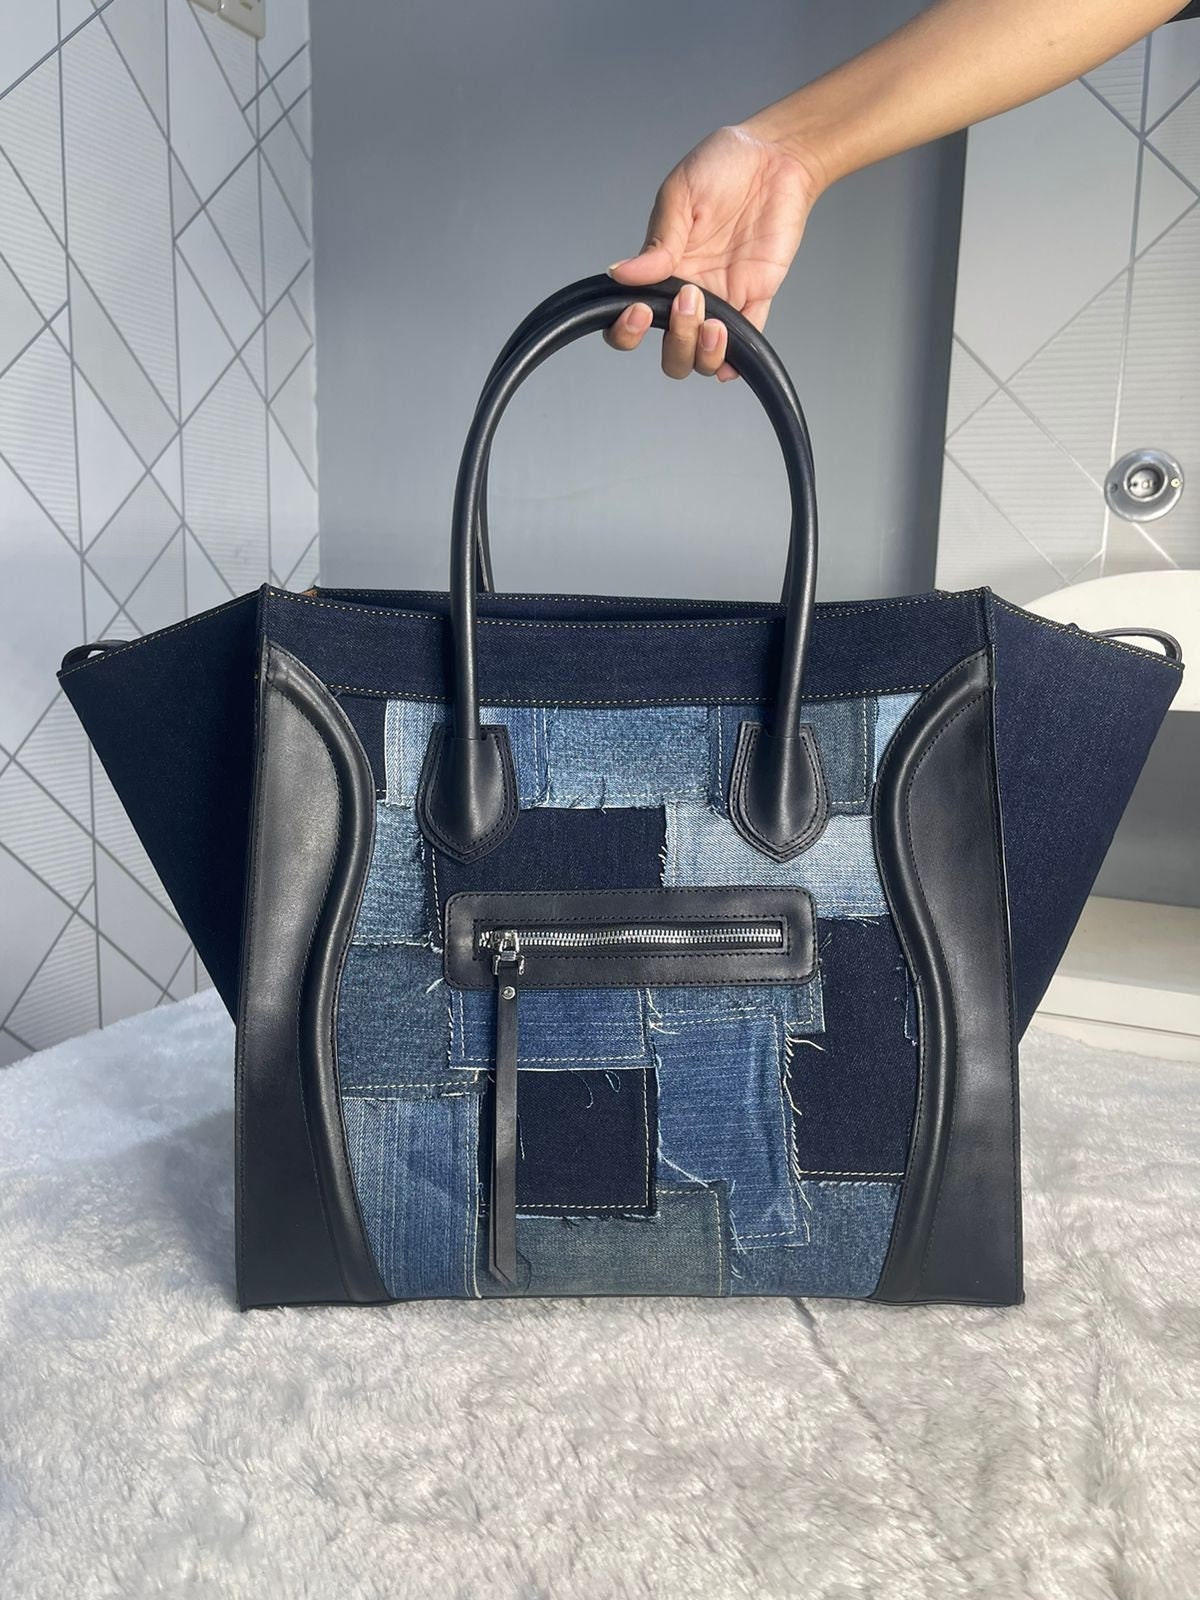 My bag of the week! Is the Nano Luggage still in style in 2022? : r/handbags